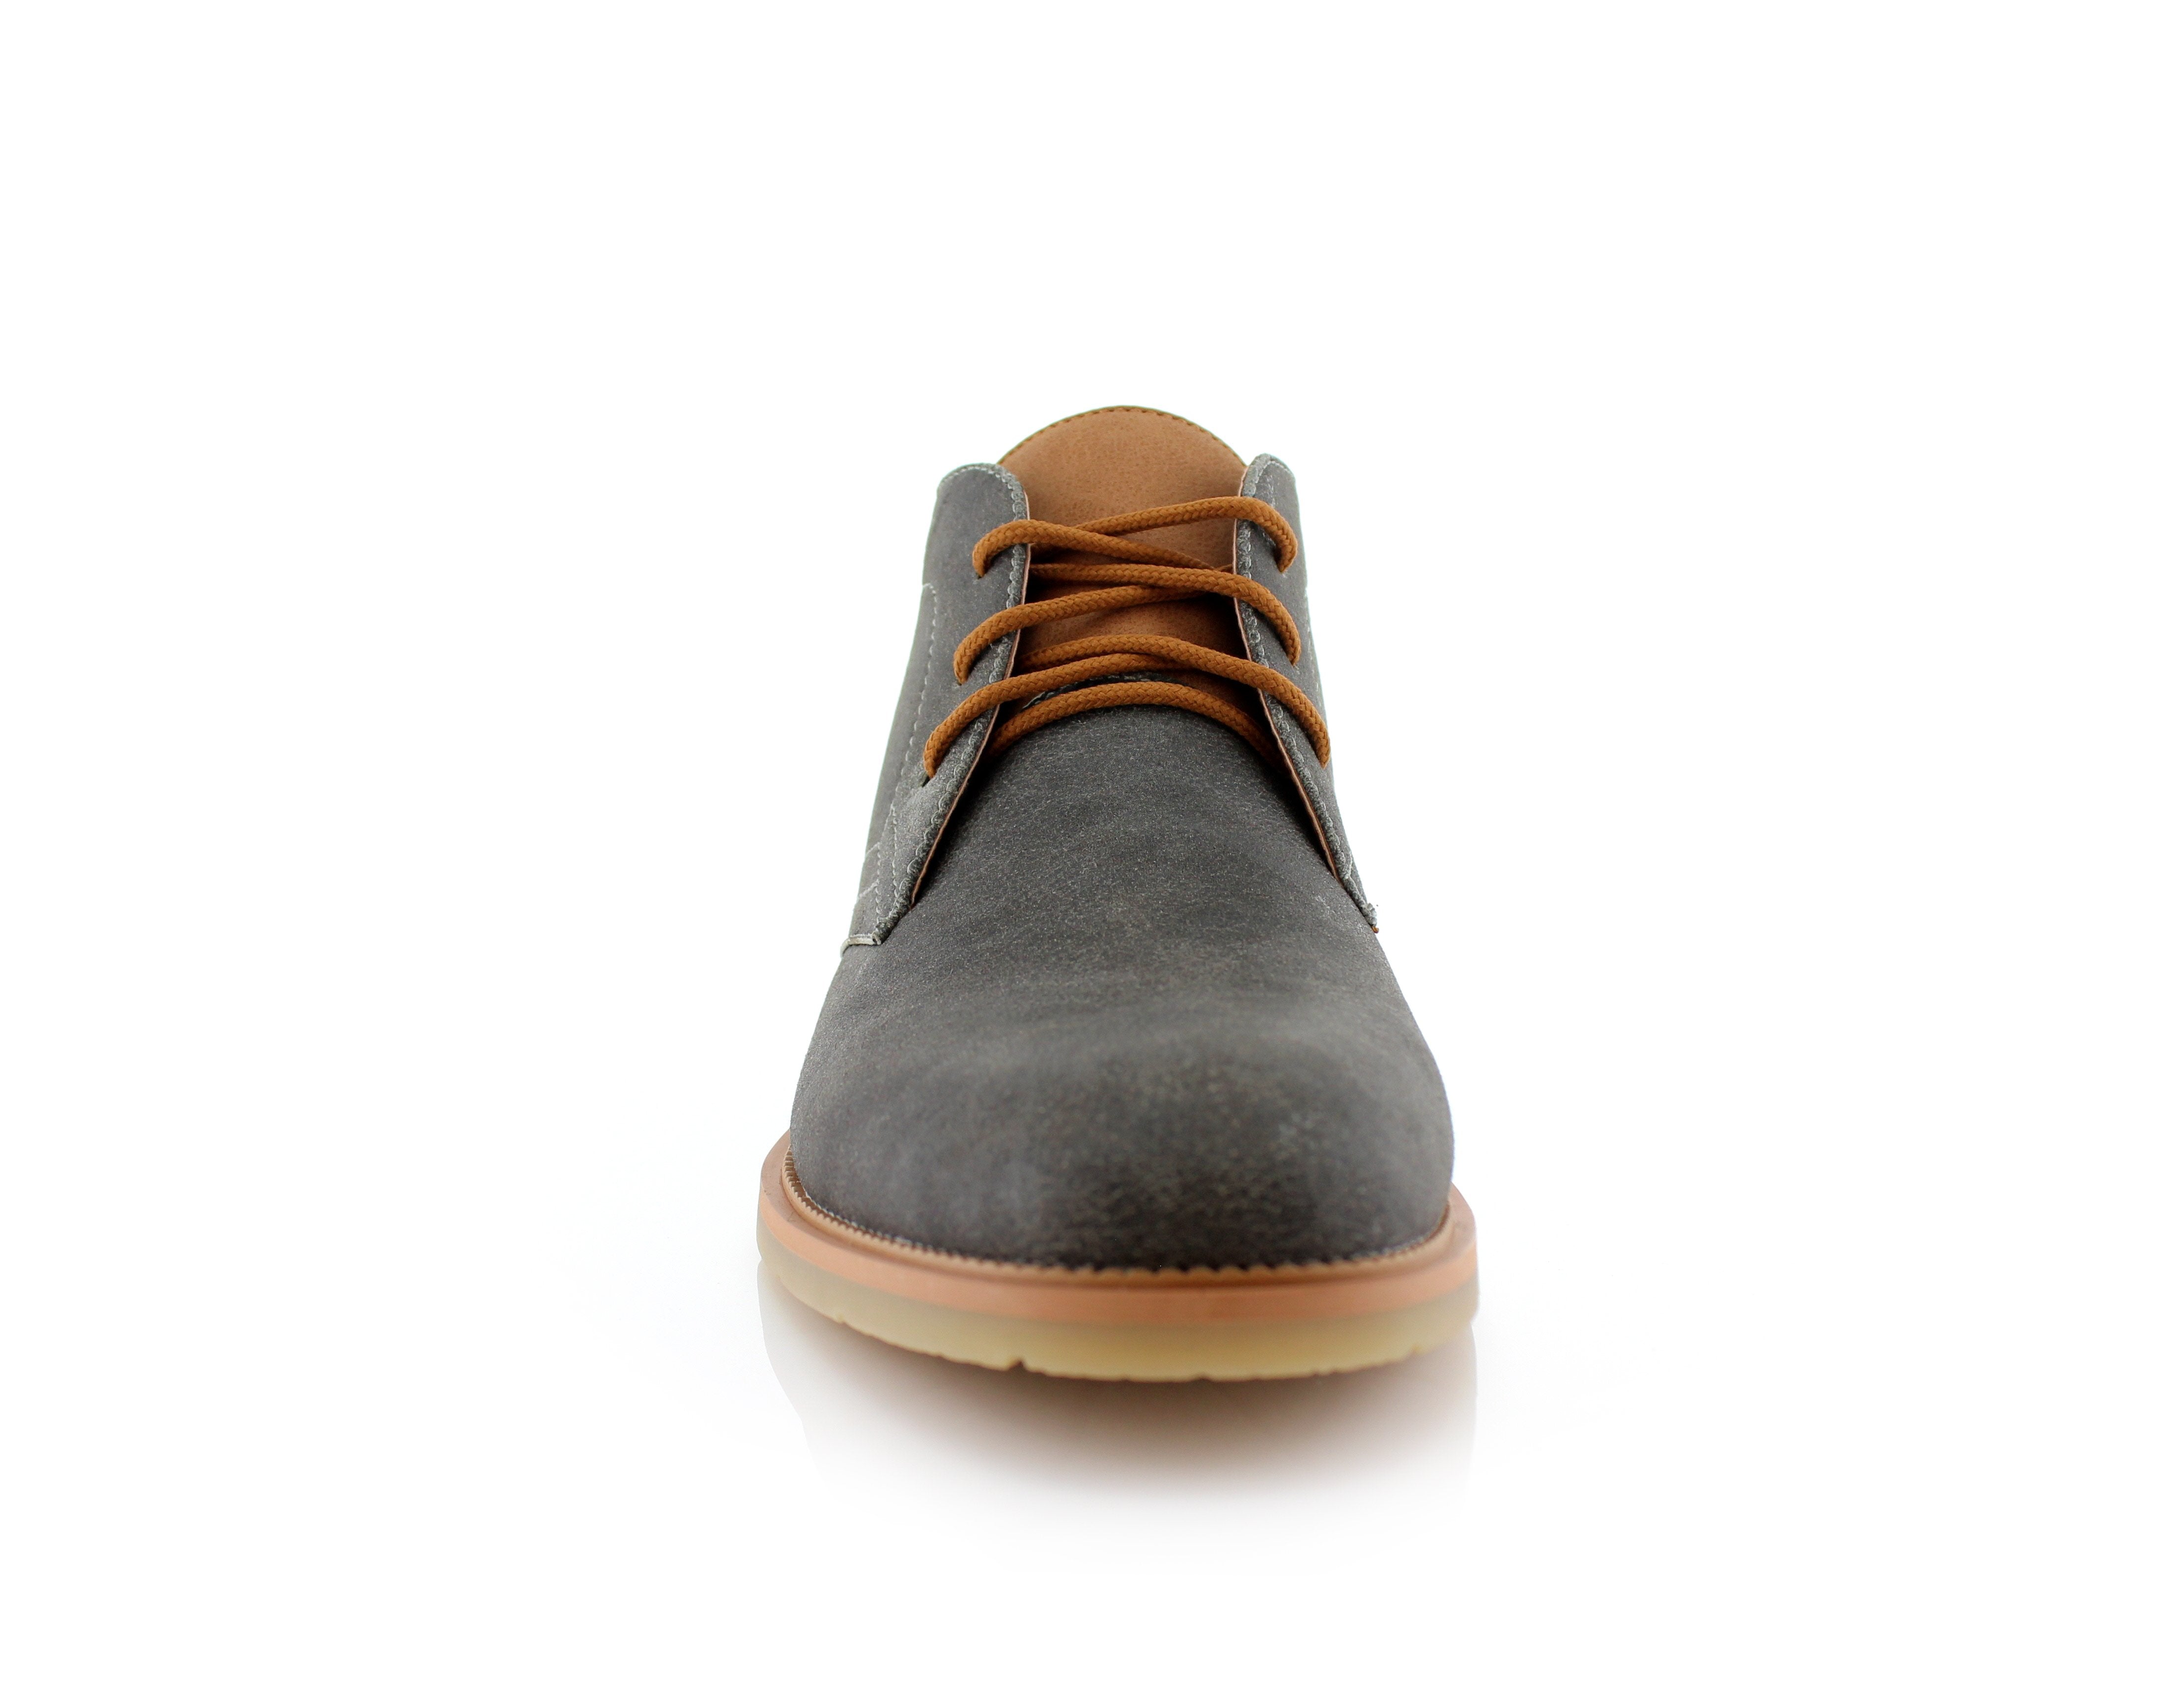 Two-Toned Chukka Boots | Marvin by Ferro Aldo | Conal Footwear | Front Angle View